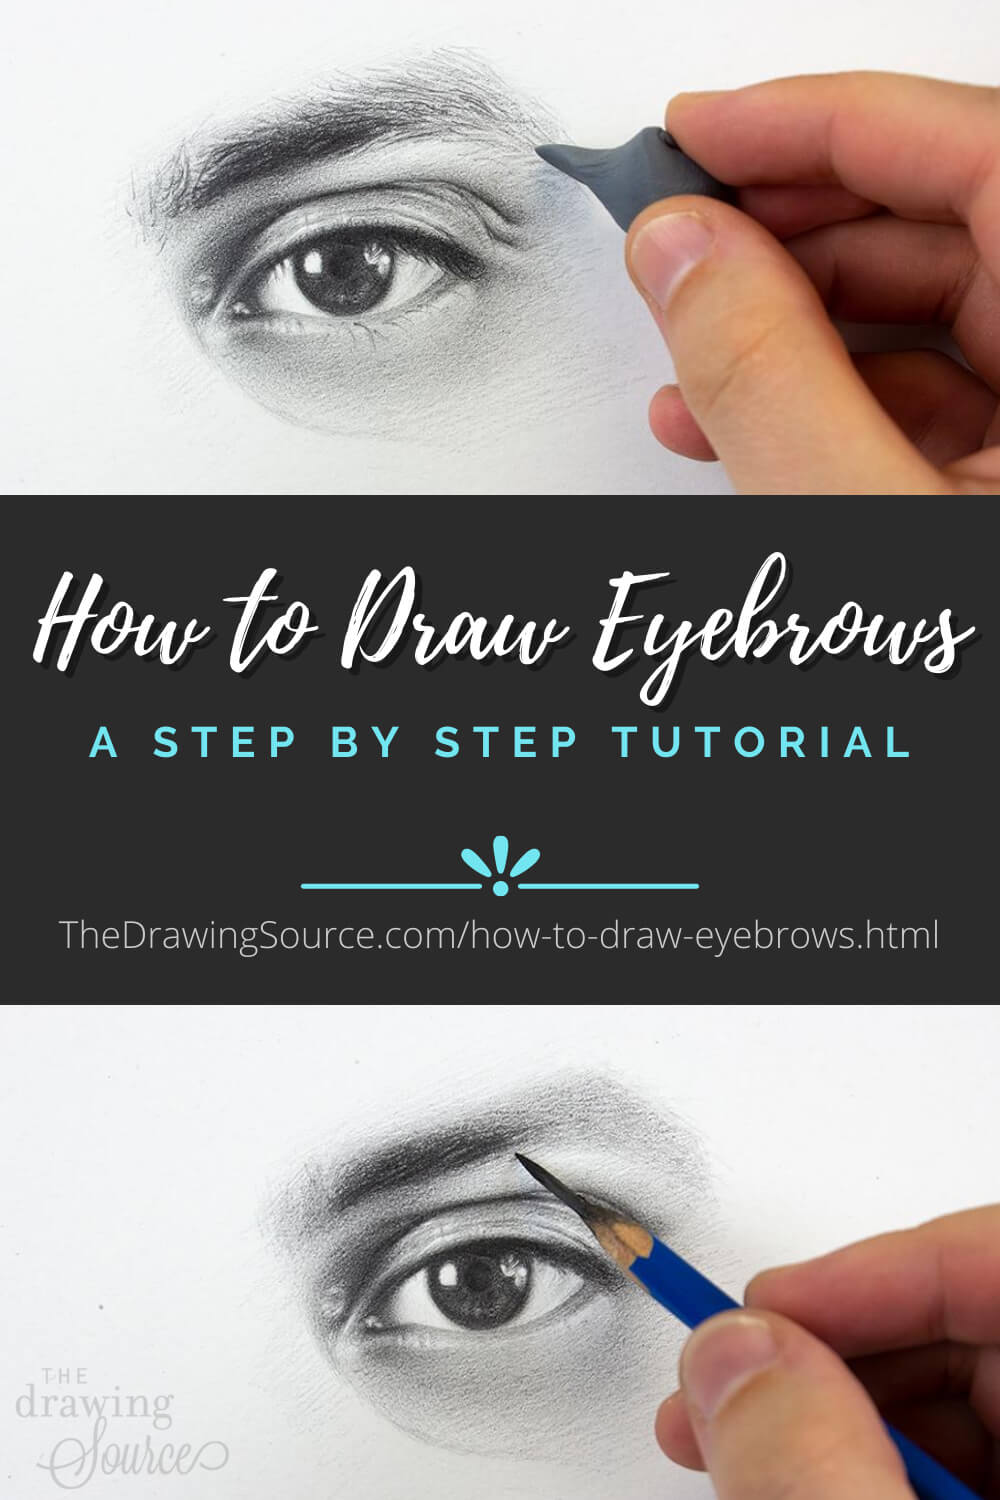 How to Draw Realistic Eyebrows: A Step by Step Tutorial